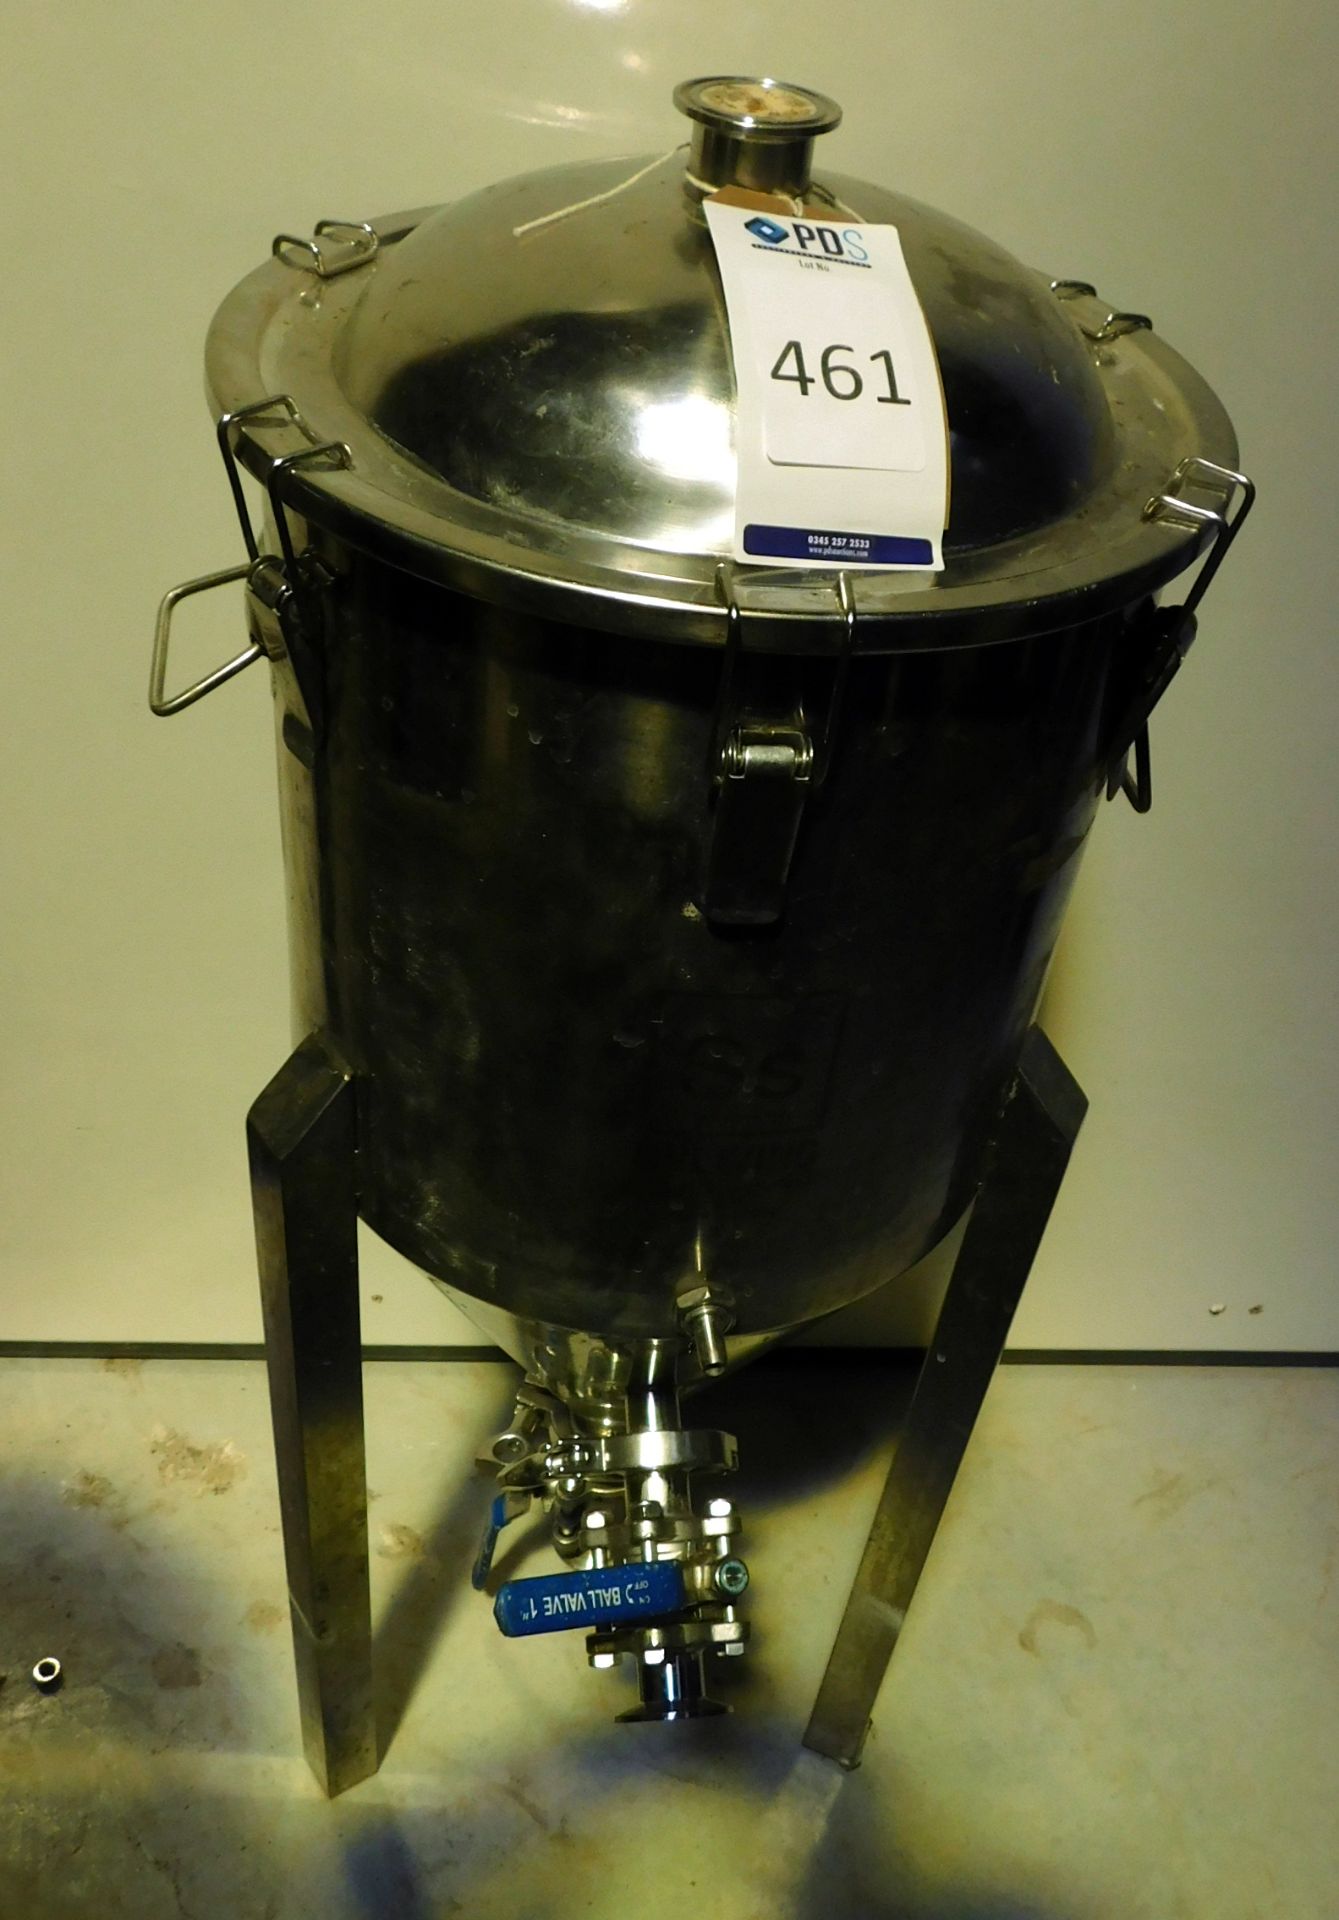 Brewing Technologies Stainless Steel 15L Fermenter (Located Brentwood, See General Notes for More